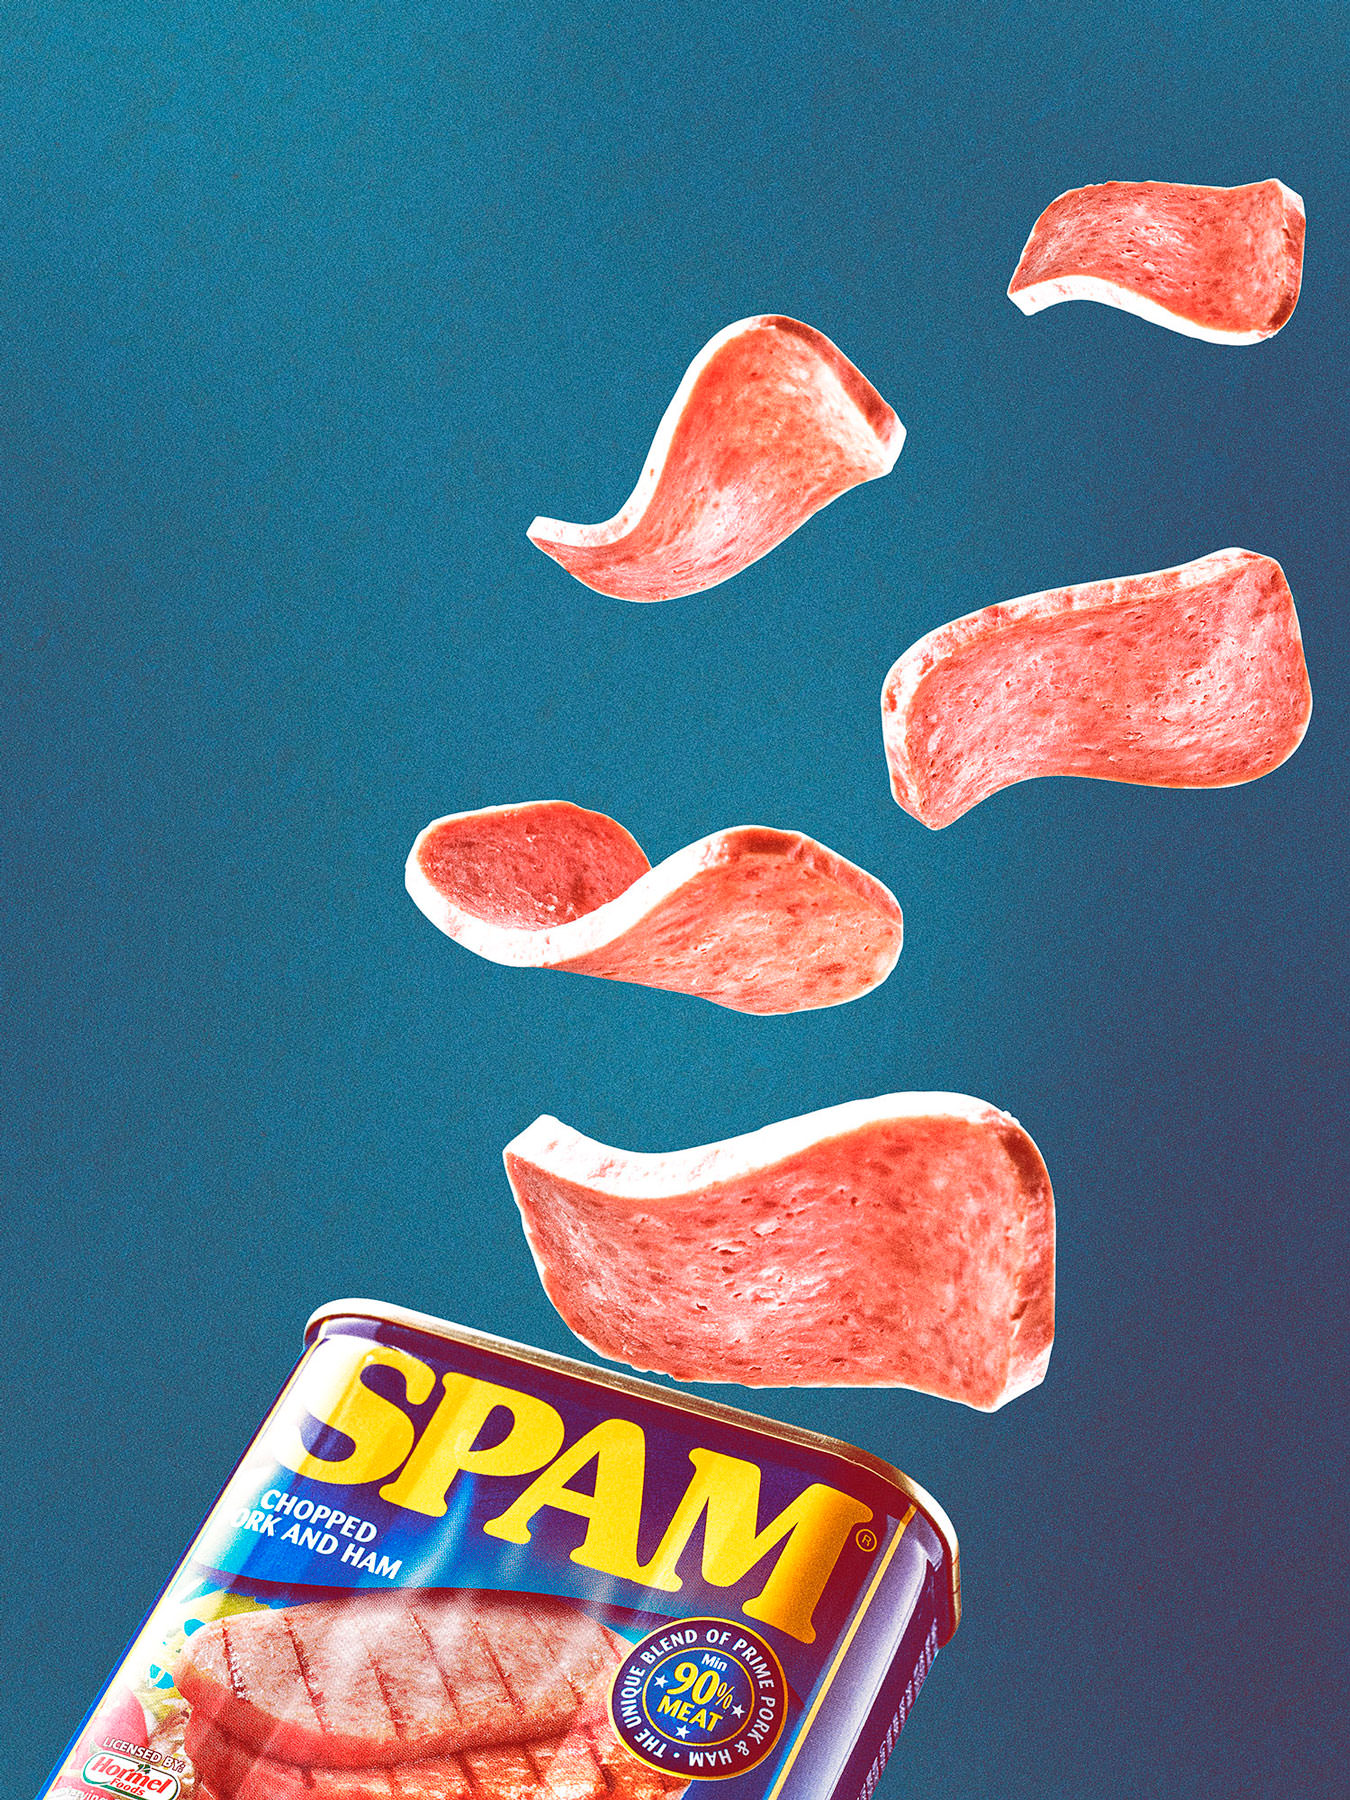 Slices of spam flying out of a spam can on a blue background - London Food & Drinks Photographer